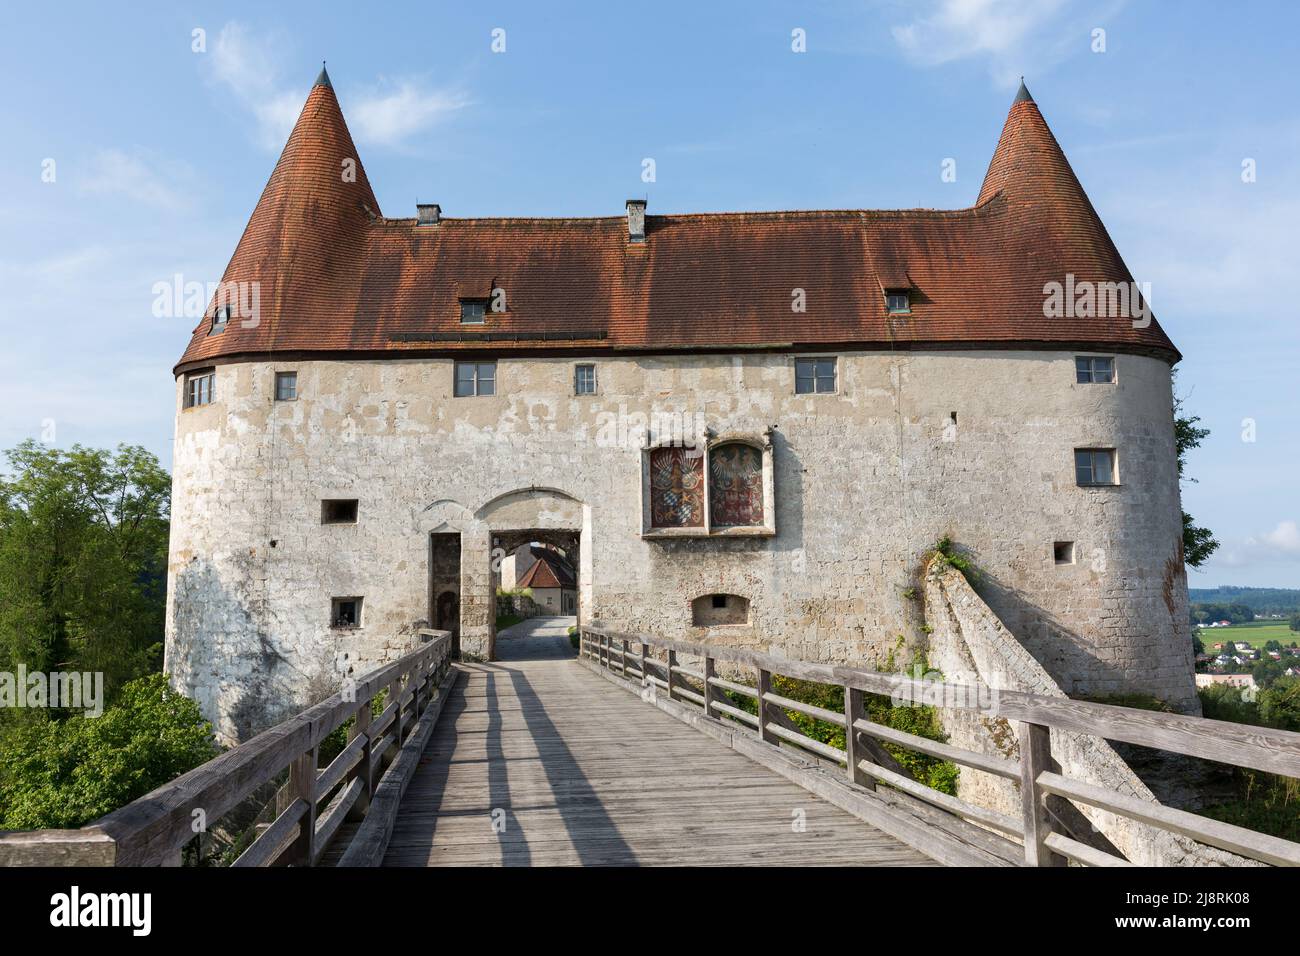 Burghausen, Germany - Jul 25, 2021: Front view of Georgstor (George's gate). With wooden bridge. Part of Burghausen castle. Stock Photo